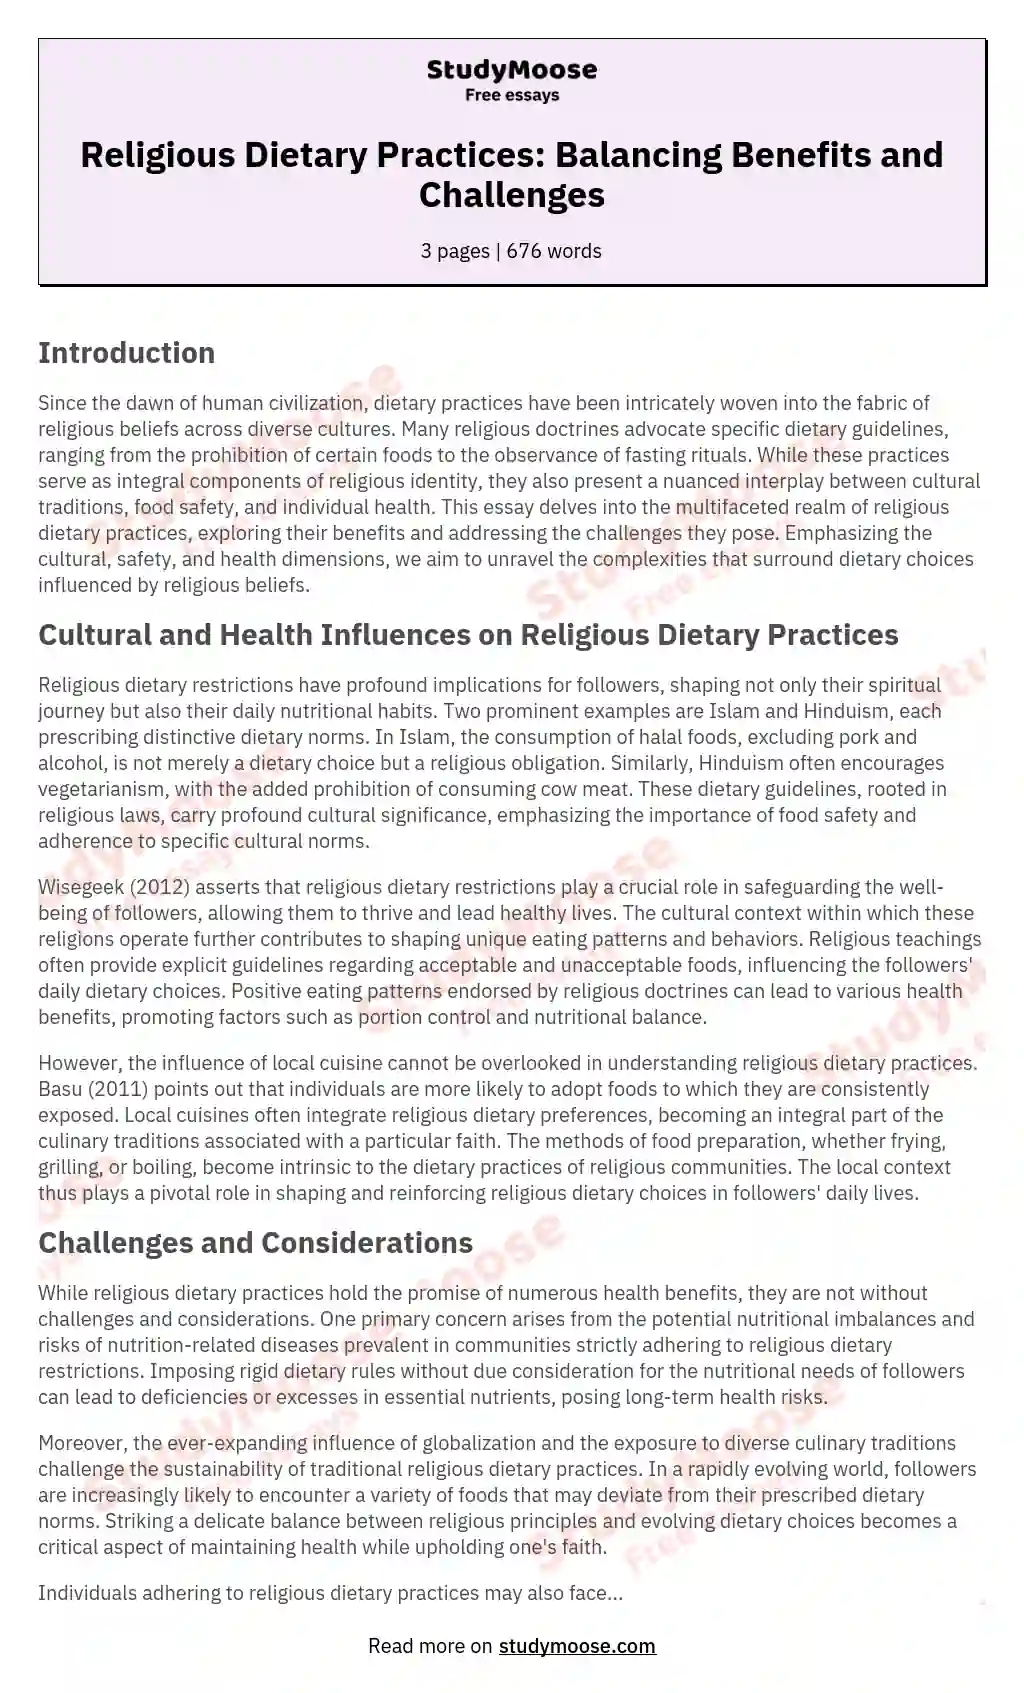 Religious Dietary Practices: Balancing Benefits and Challenges essay